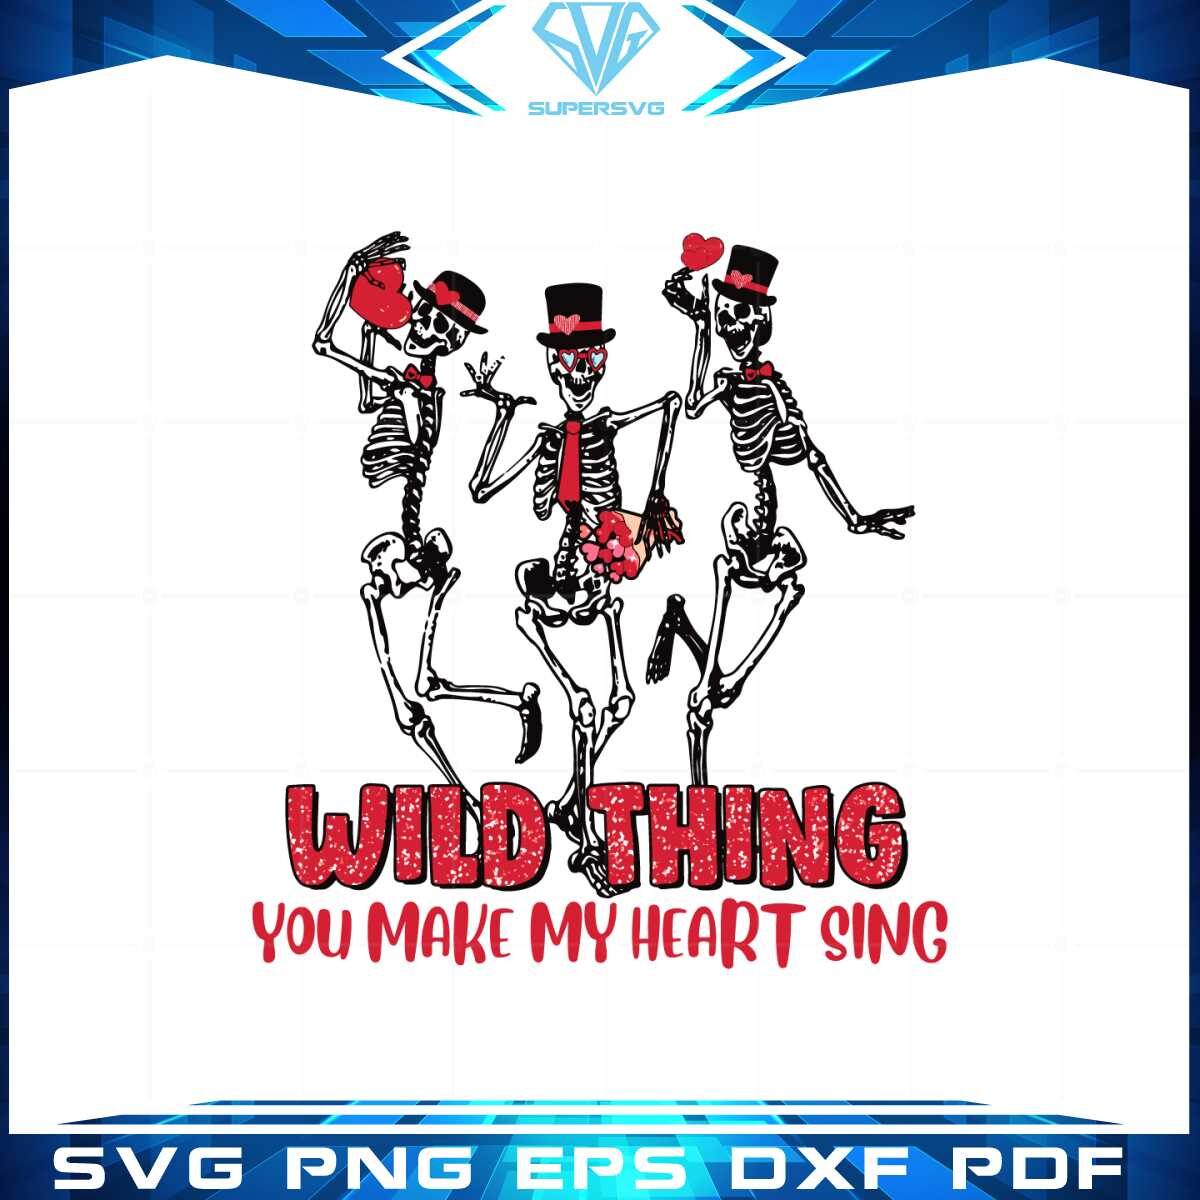 wild-thing-yoy-make-my-heart-sing-svg-graphic-designs-files